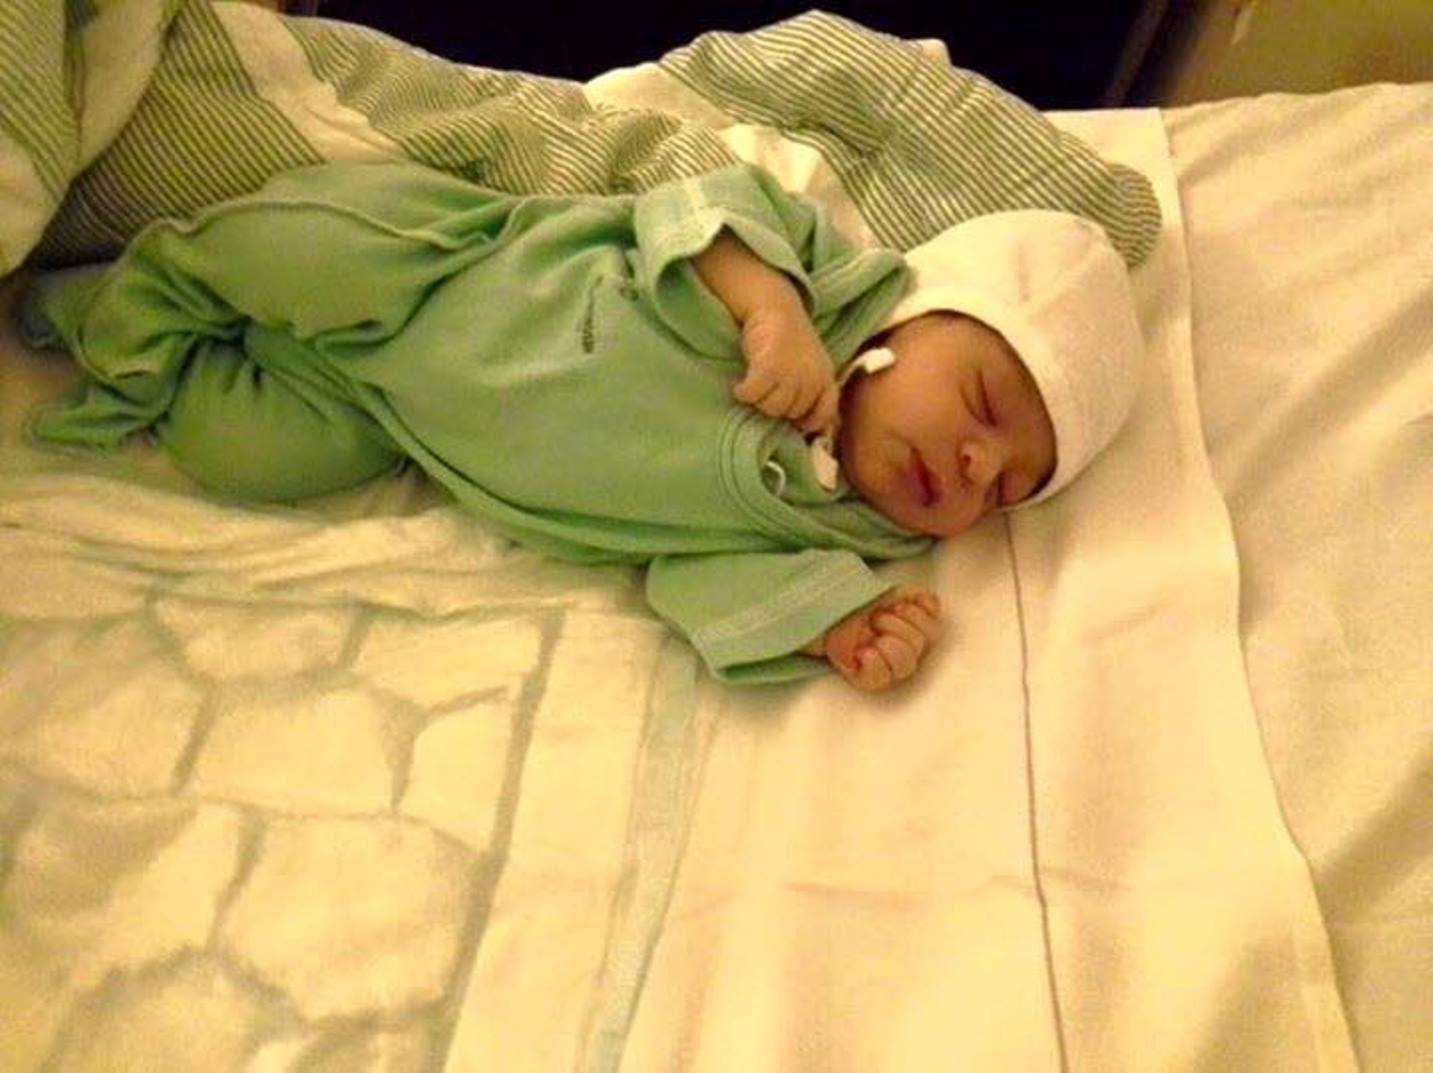 This is the Syrian couple’s newborn daughter Luna. Photo via Facebook